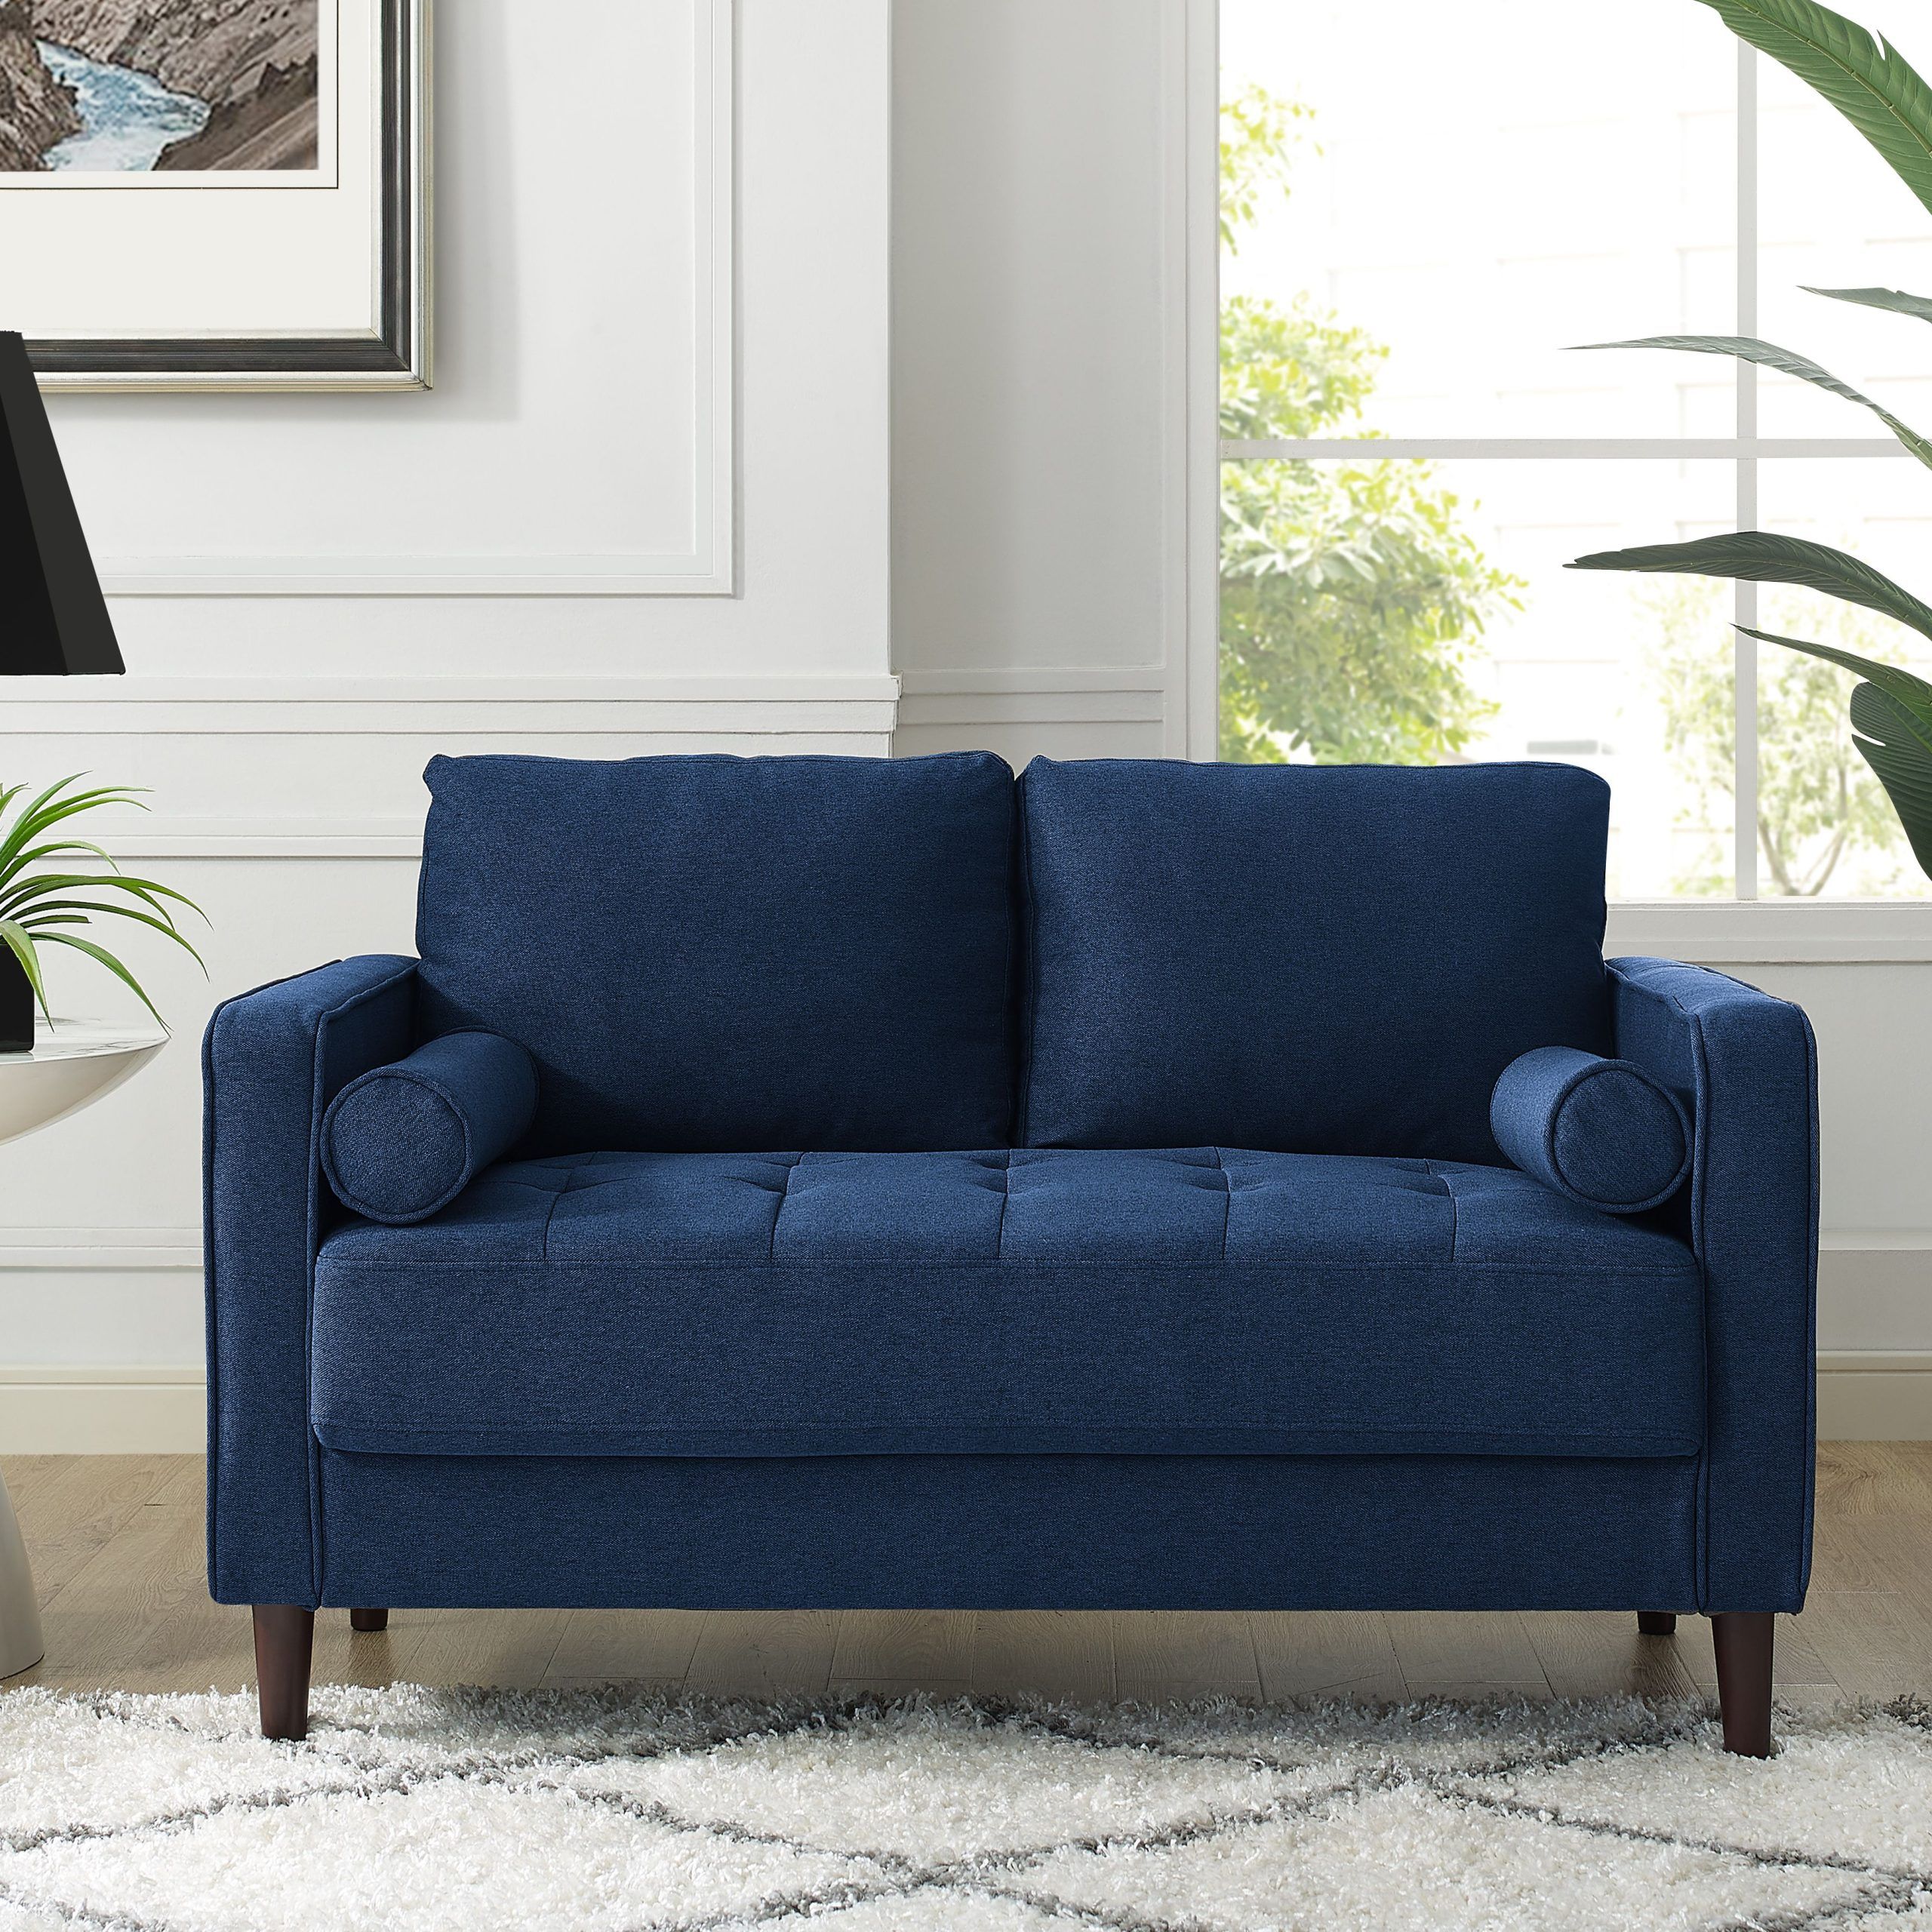 Lifestyle Solutions Lorelei Mid Century Modern Loveseat, Blue Fabric Intended For Navy Sleeper Sofa Couches (View 13 of 20)